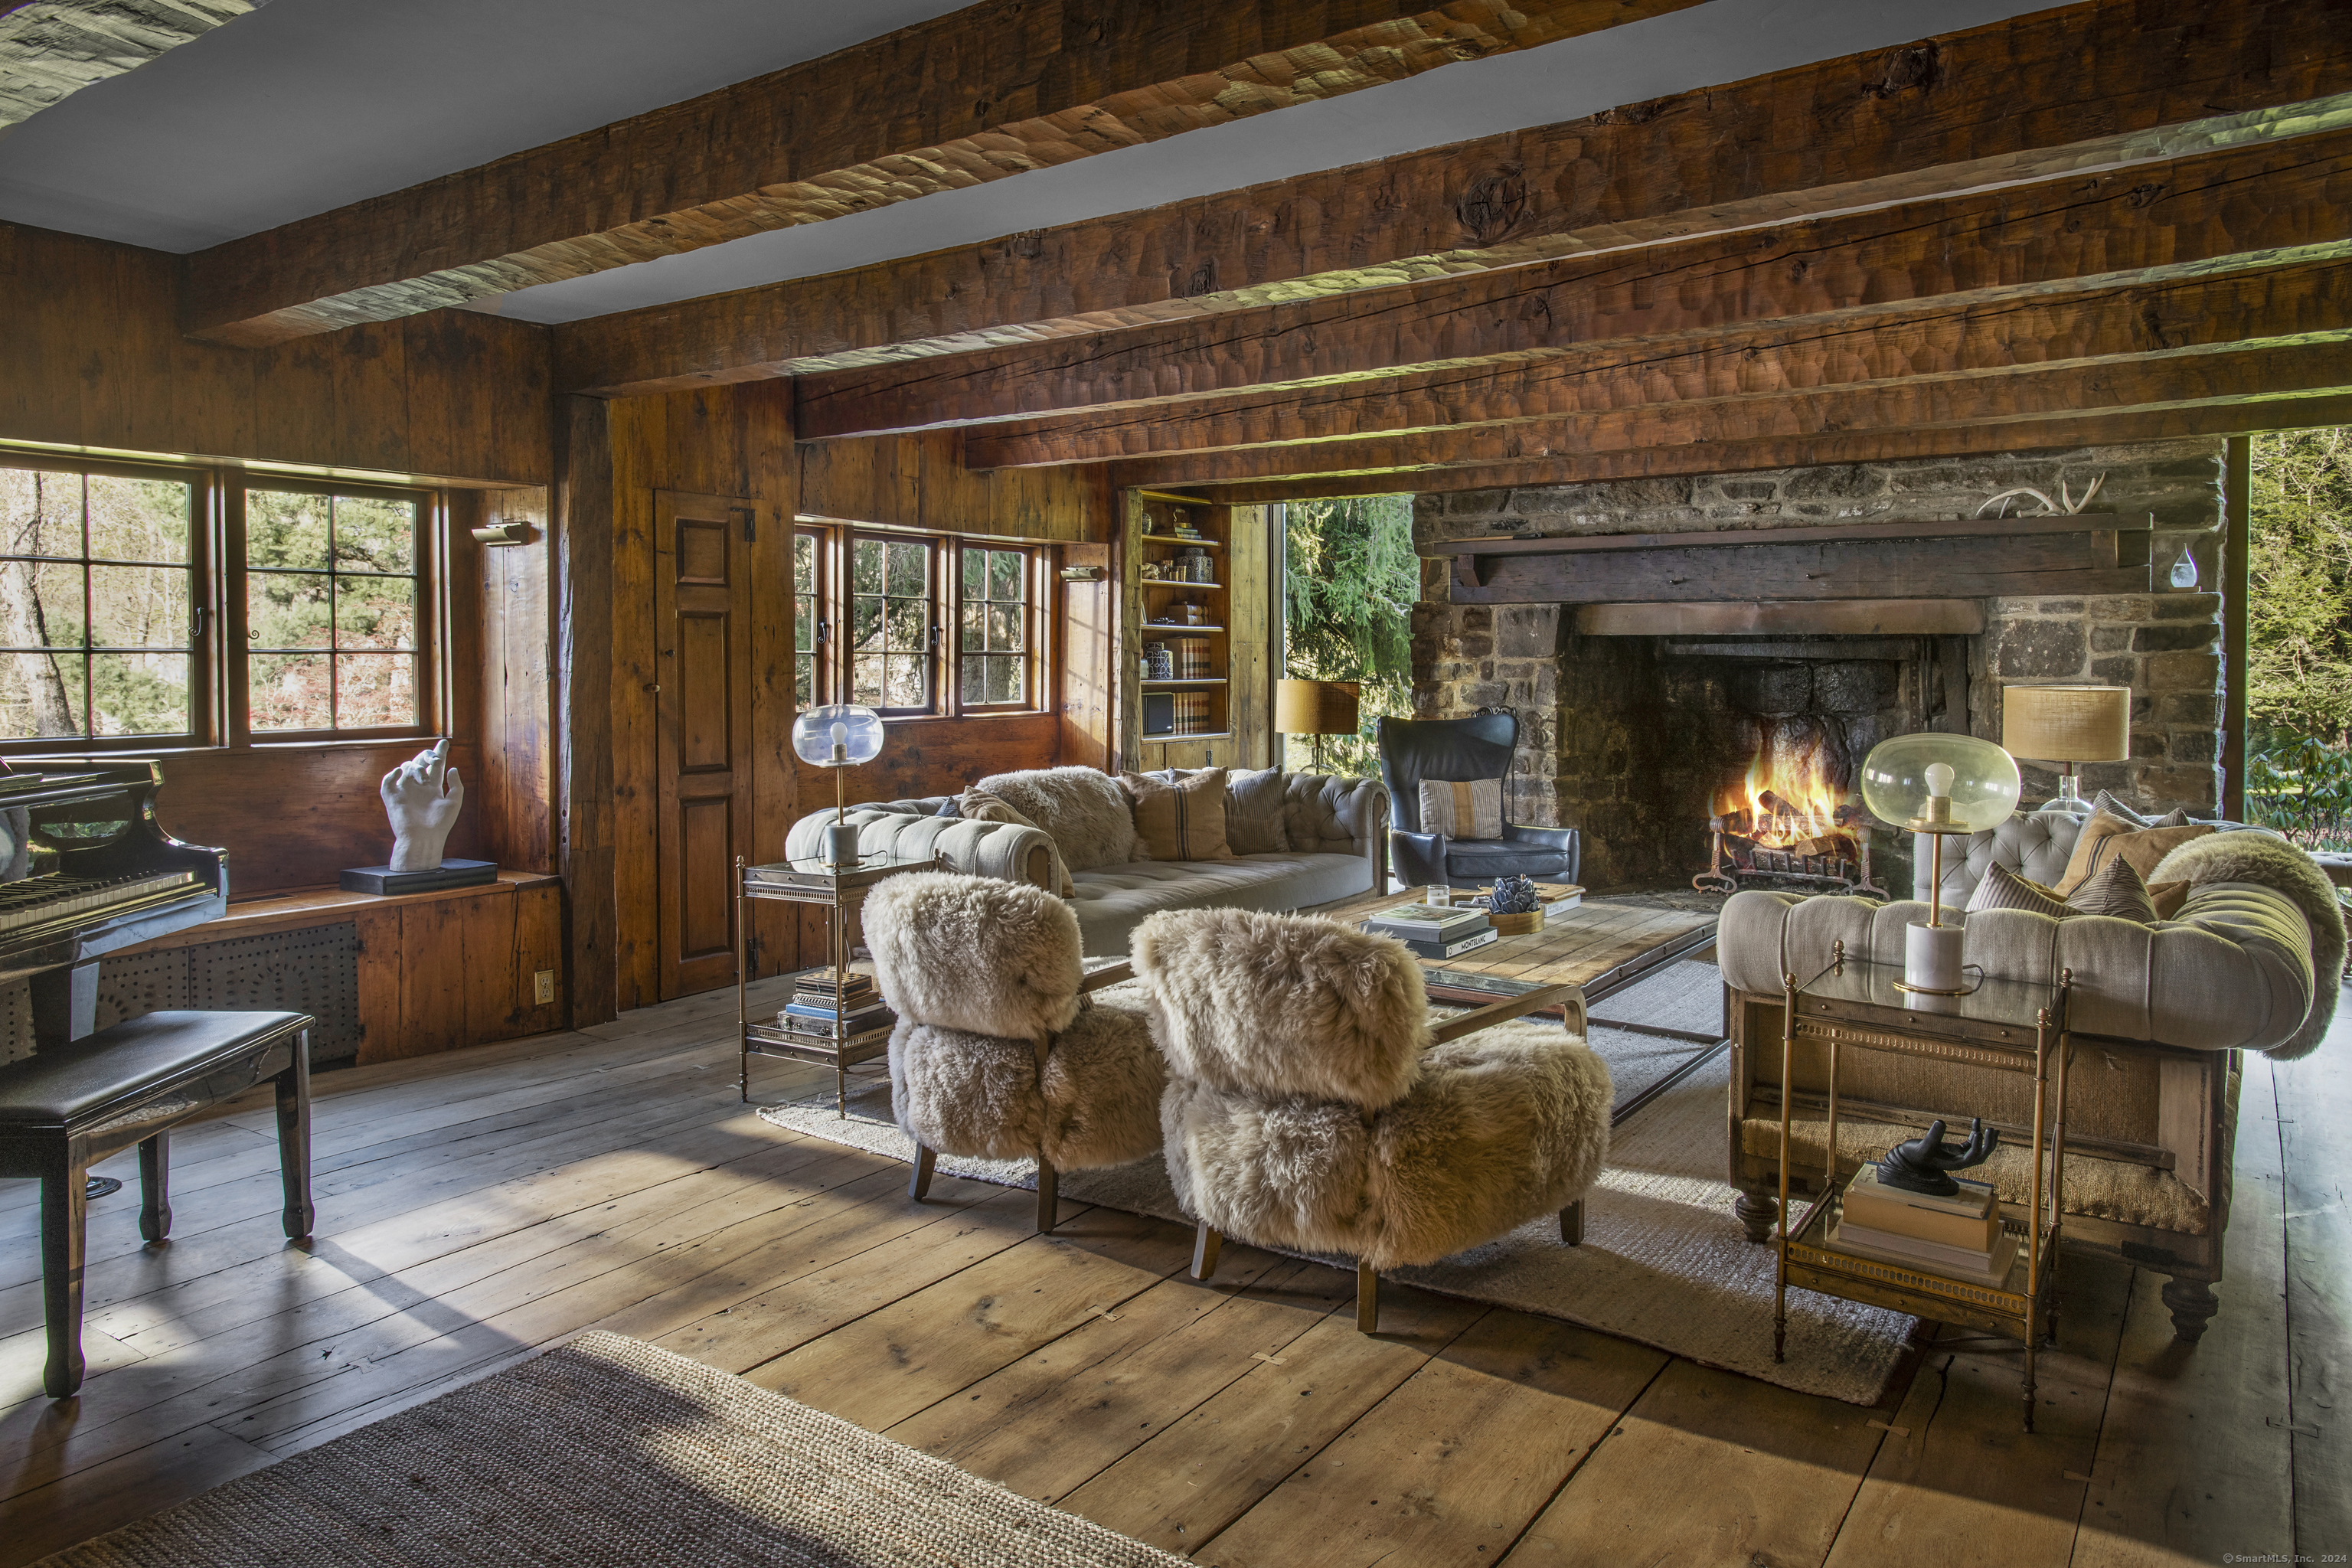 Property for Sale at 1 Echo Hill Road, New Canaan, Connecticut - Bedrooms: 5 
Bathrooms: 6 
Rooms: 14  - $5,195,000